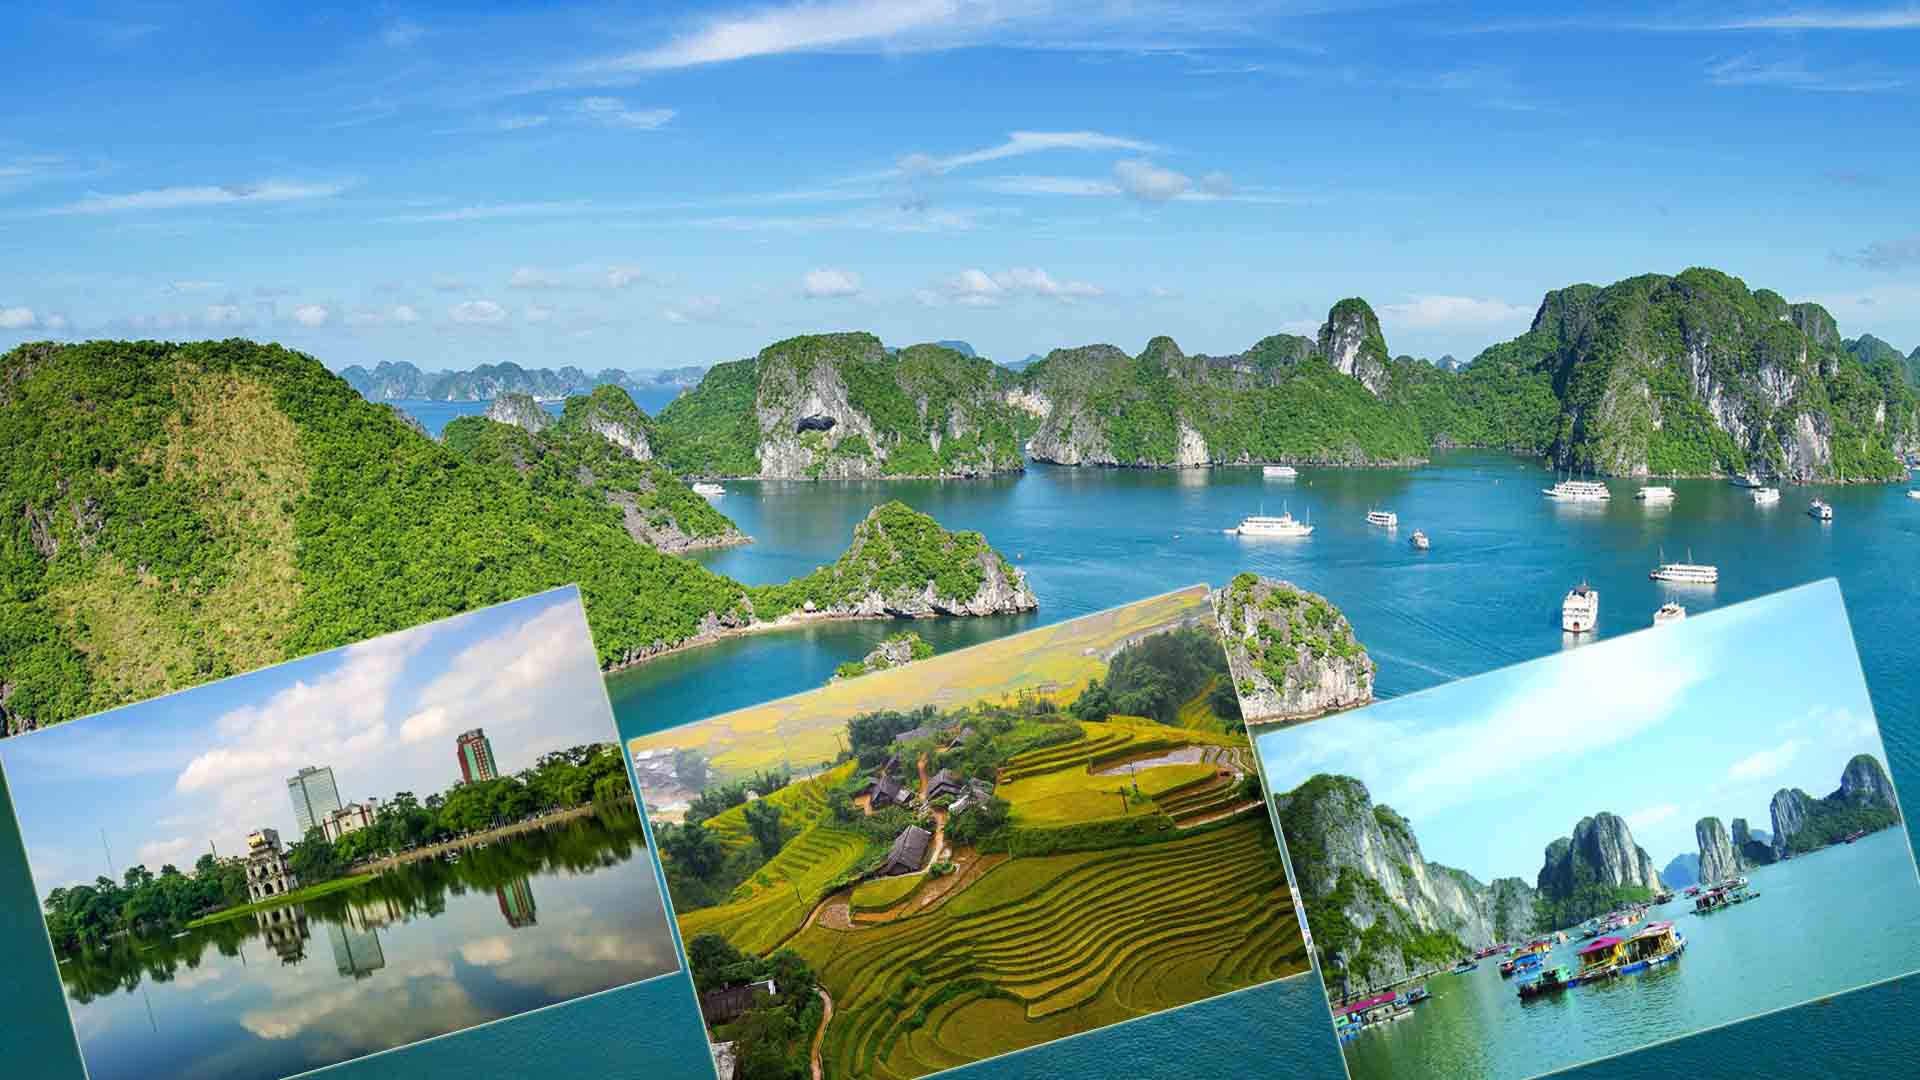 Hanoi Sapa Halong Bay Tour Packages - See the best of Hanoi, Sapa and Halong Bay